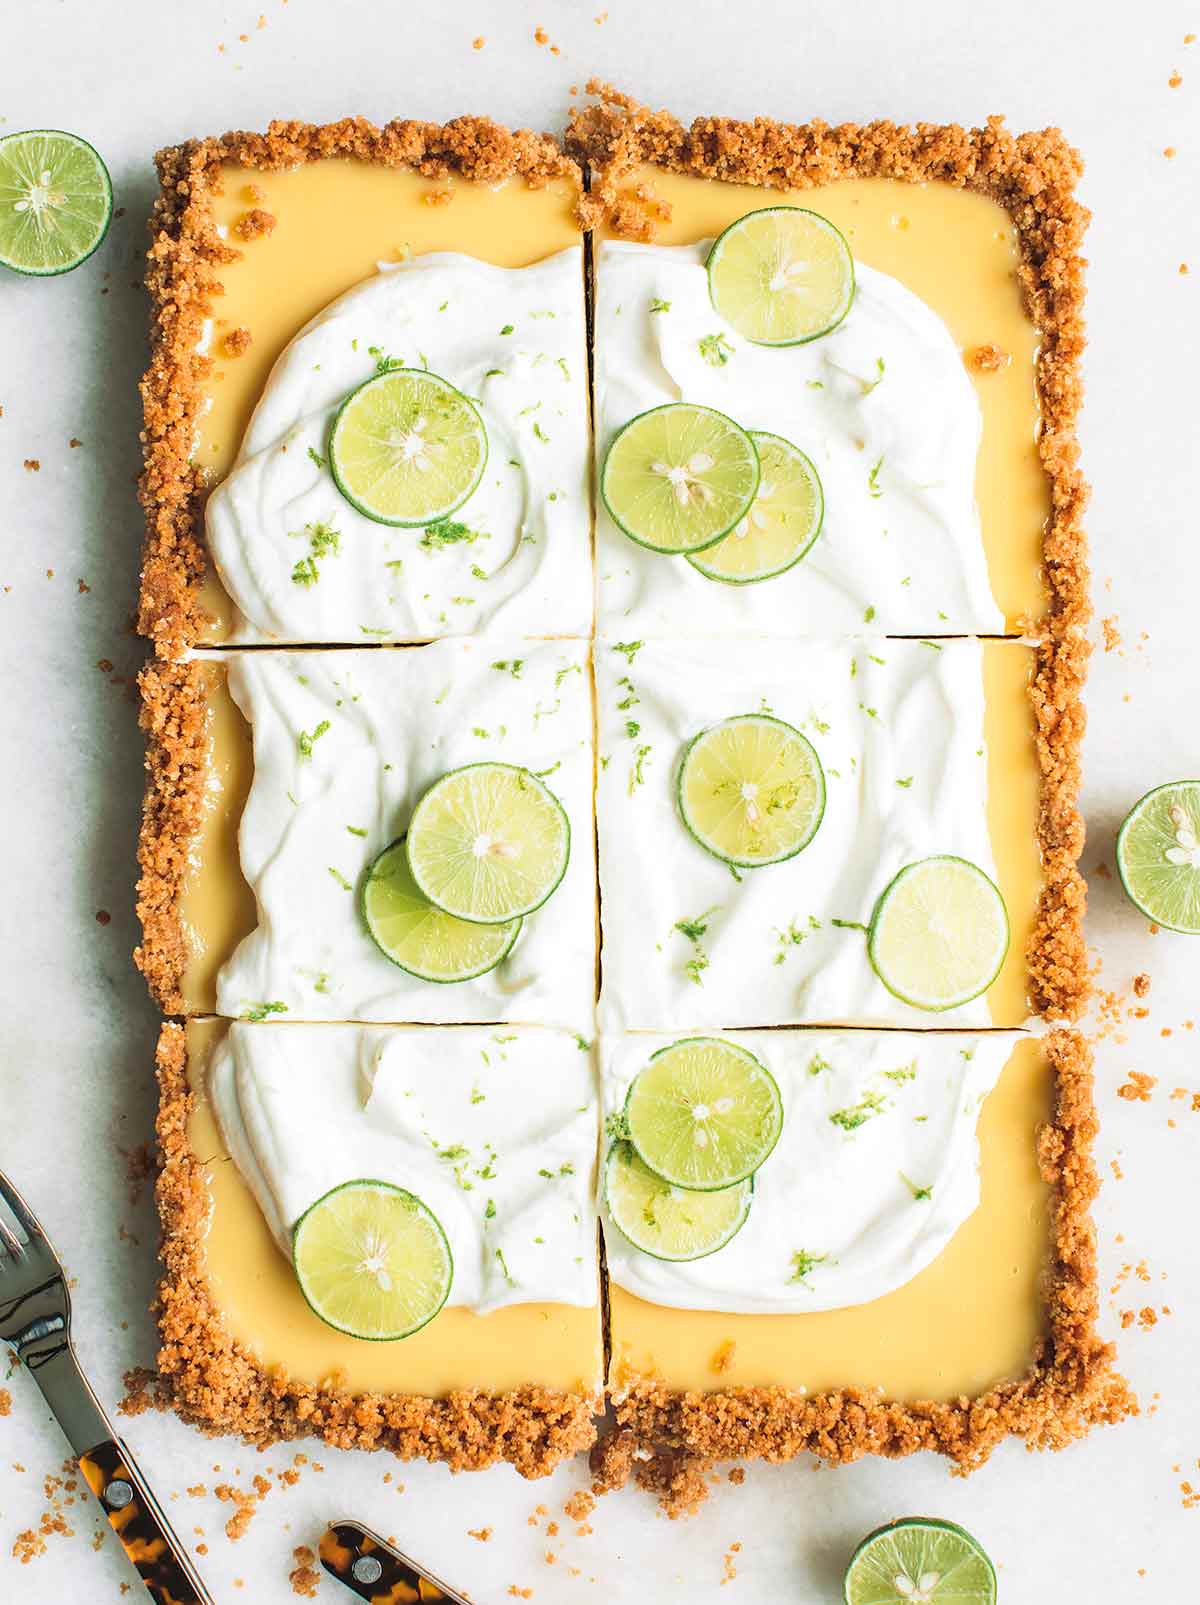 A large rectangular key lime pie cut into sixths, covered with whipping cream and slices of lime, covered with lime zest and sliced limes next to it.